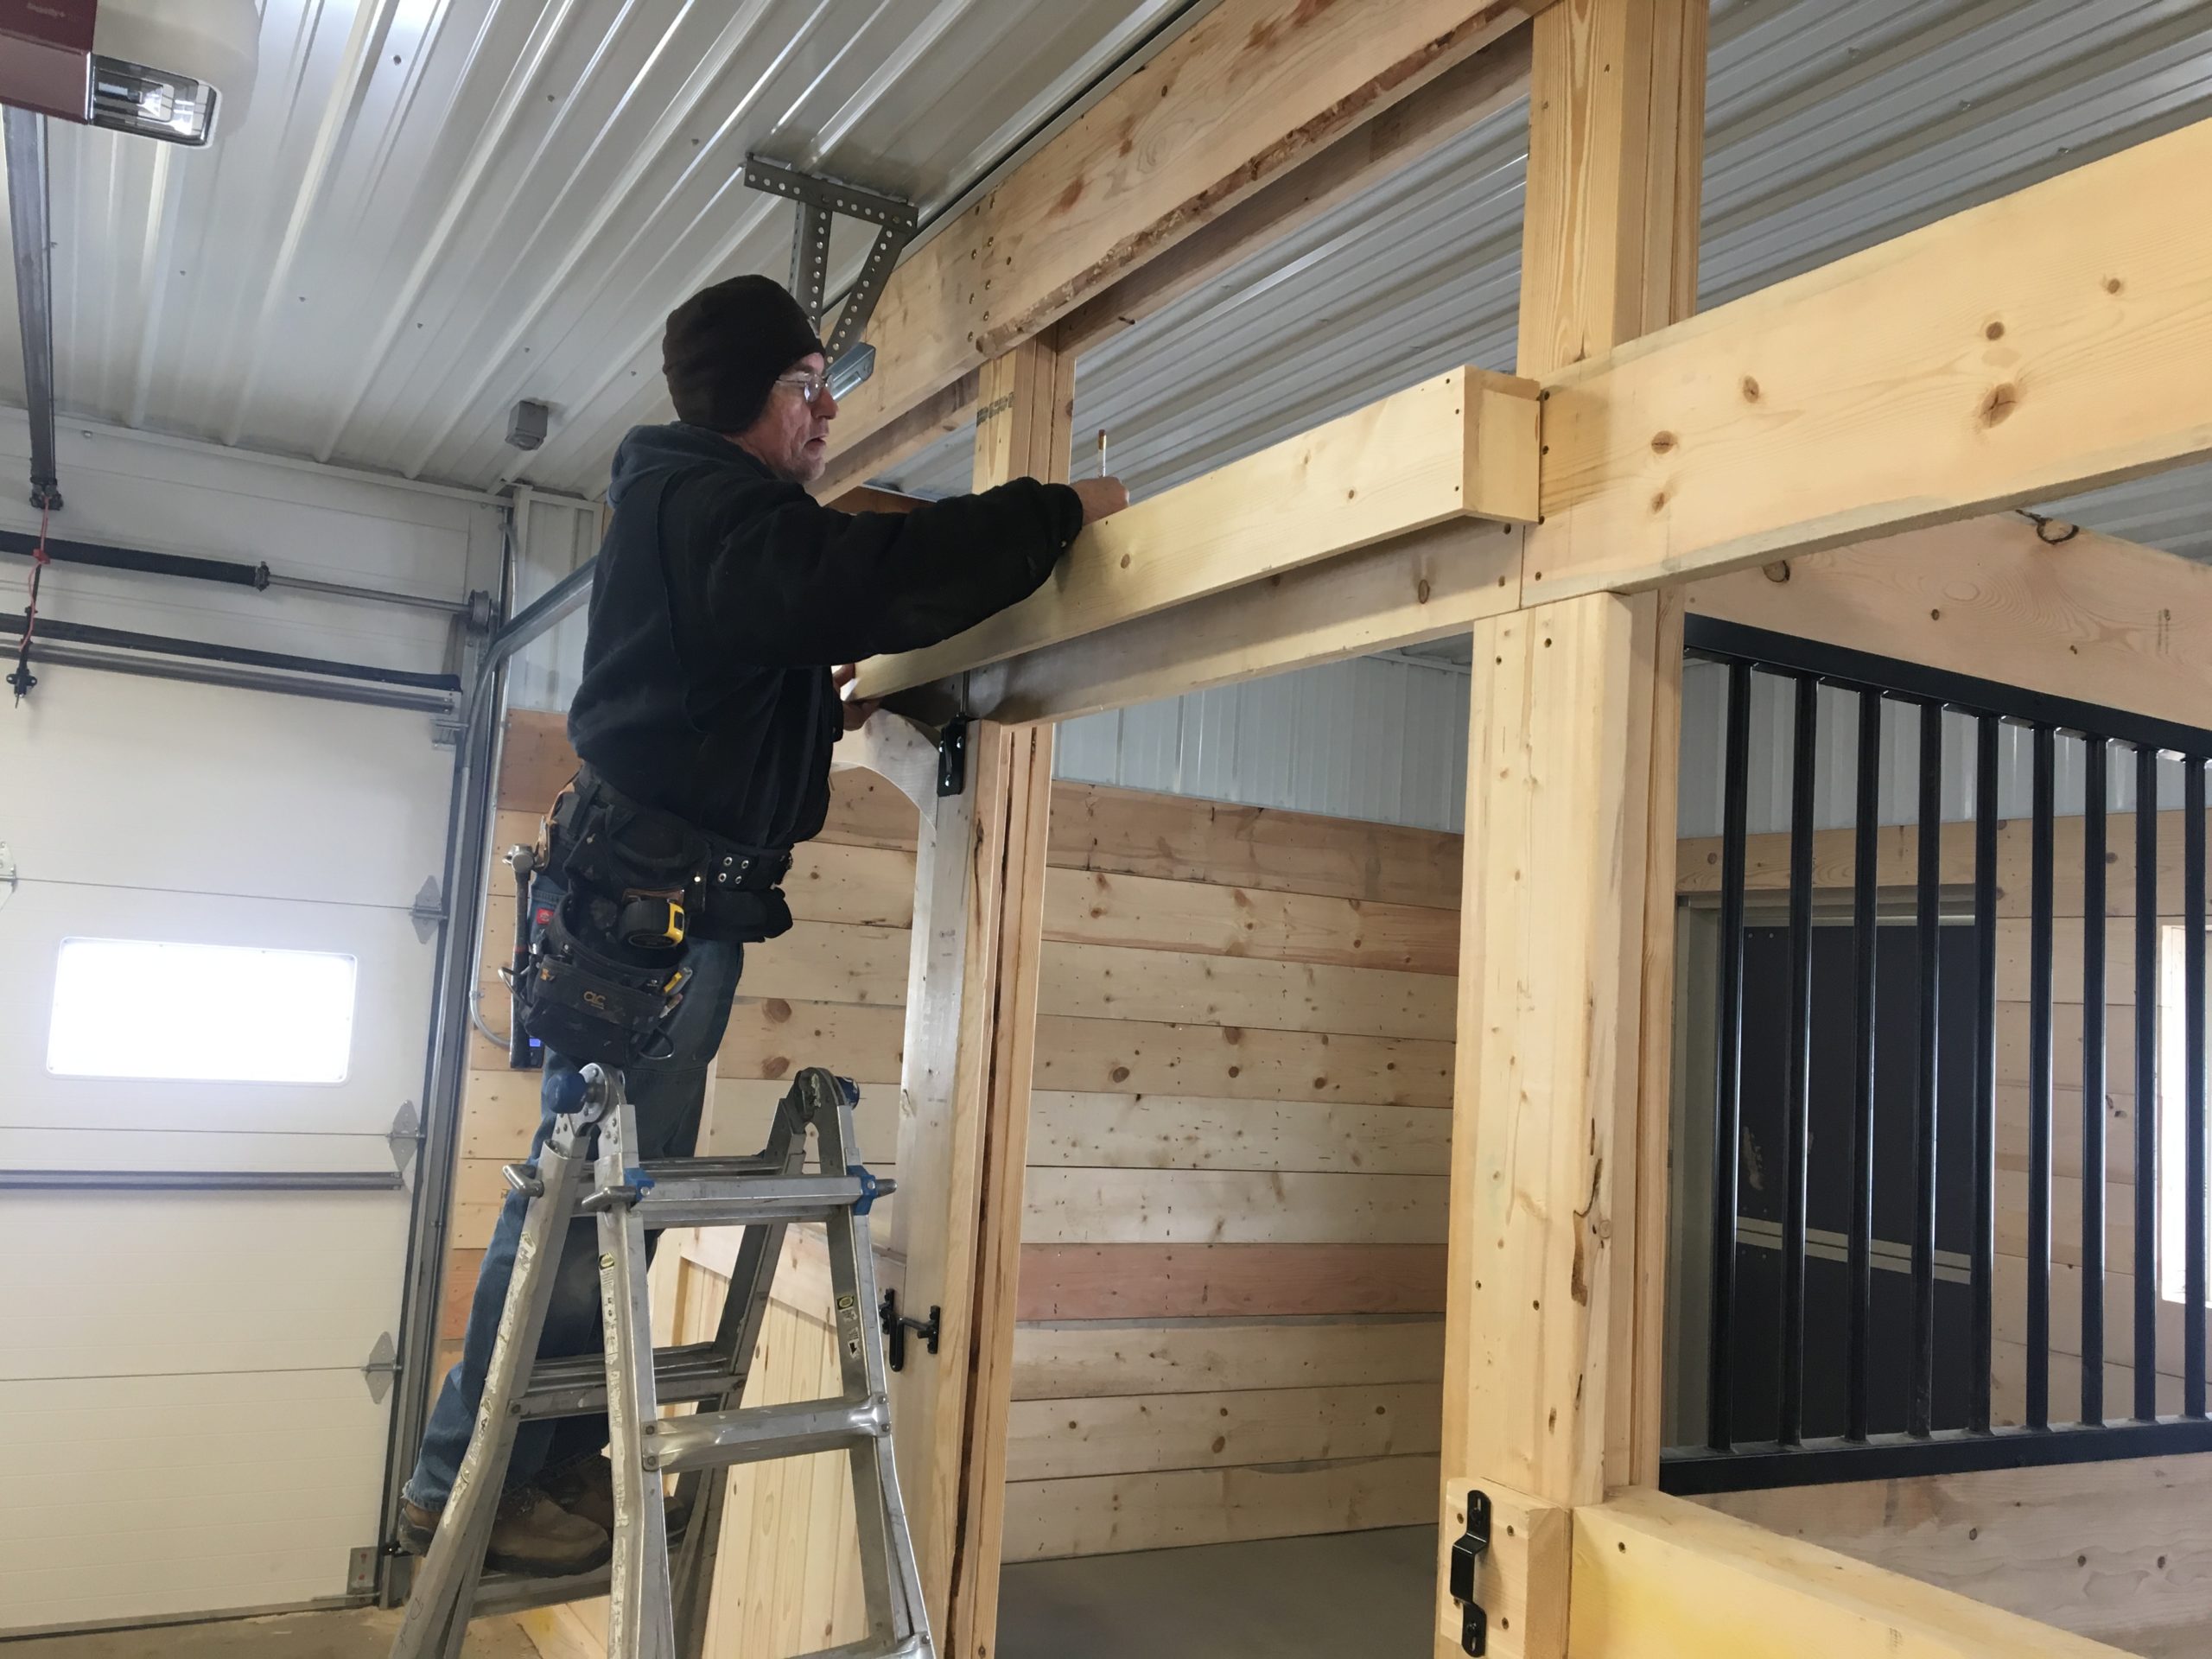 Independent contractor stands on a ladder to work on a construction project measuring and making wood